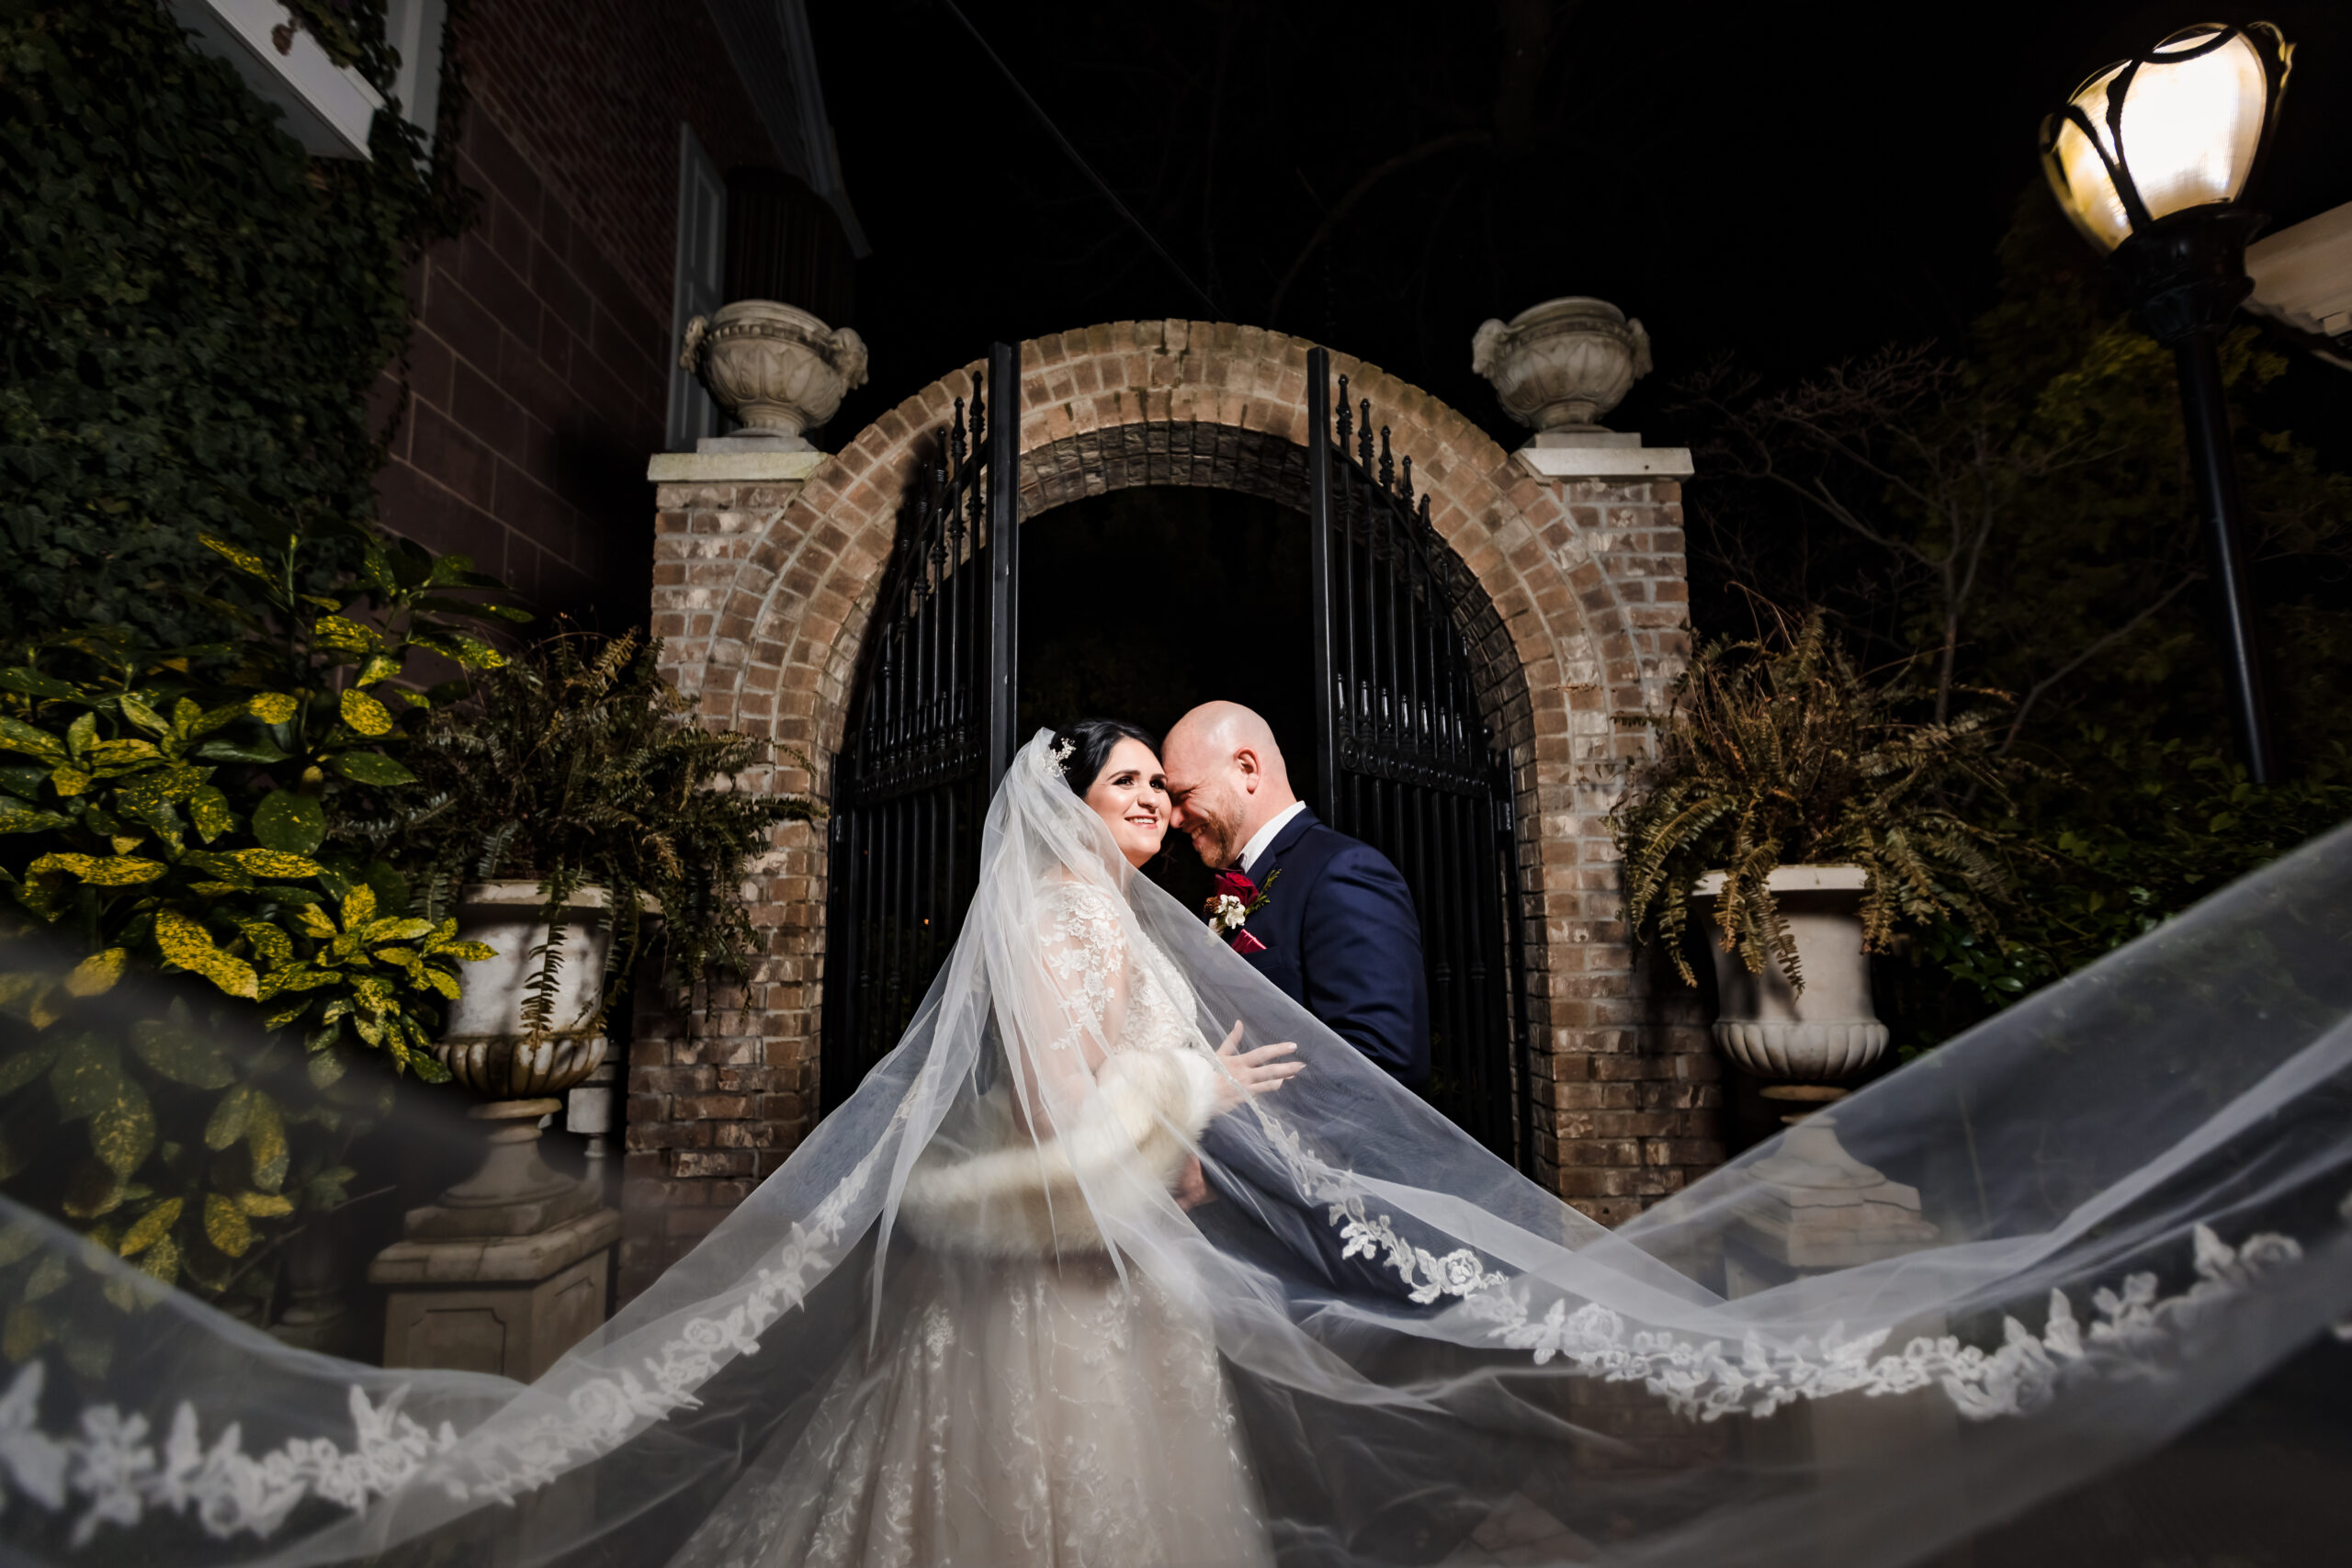 A captivating and creative night portrait of a joyful couple, both beaming with happiness, as the bride's veil gracefully floats in the air, creating a mesmerizing view. This enchanting moment was skillfully captured at The Brownstone by North Jersey wedding photographer Jarot Bocanegra